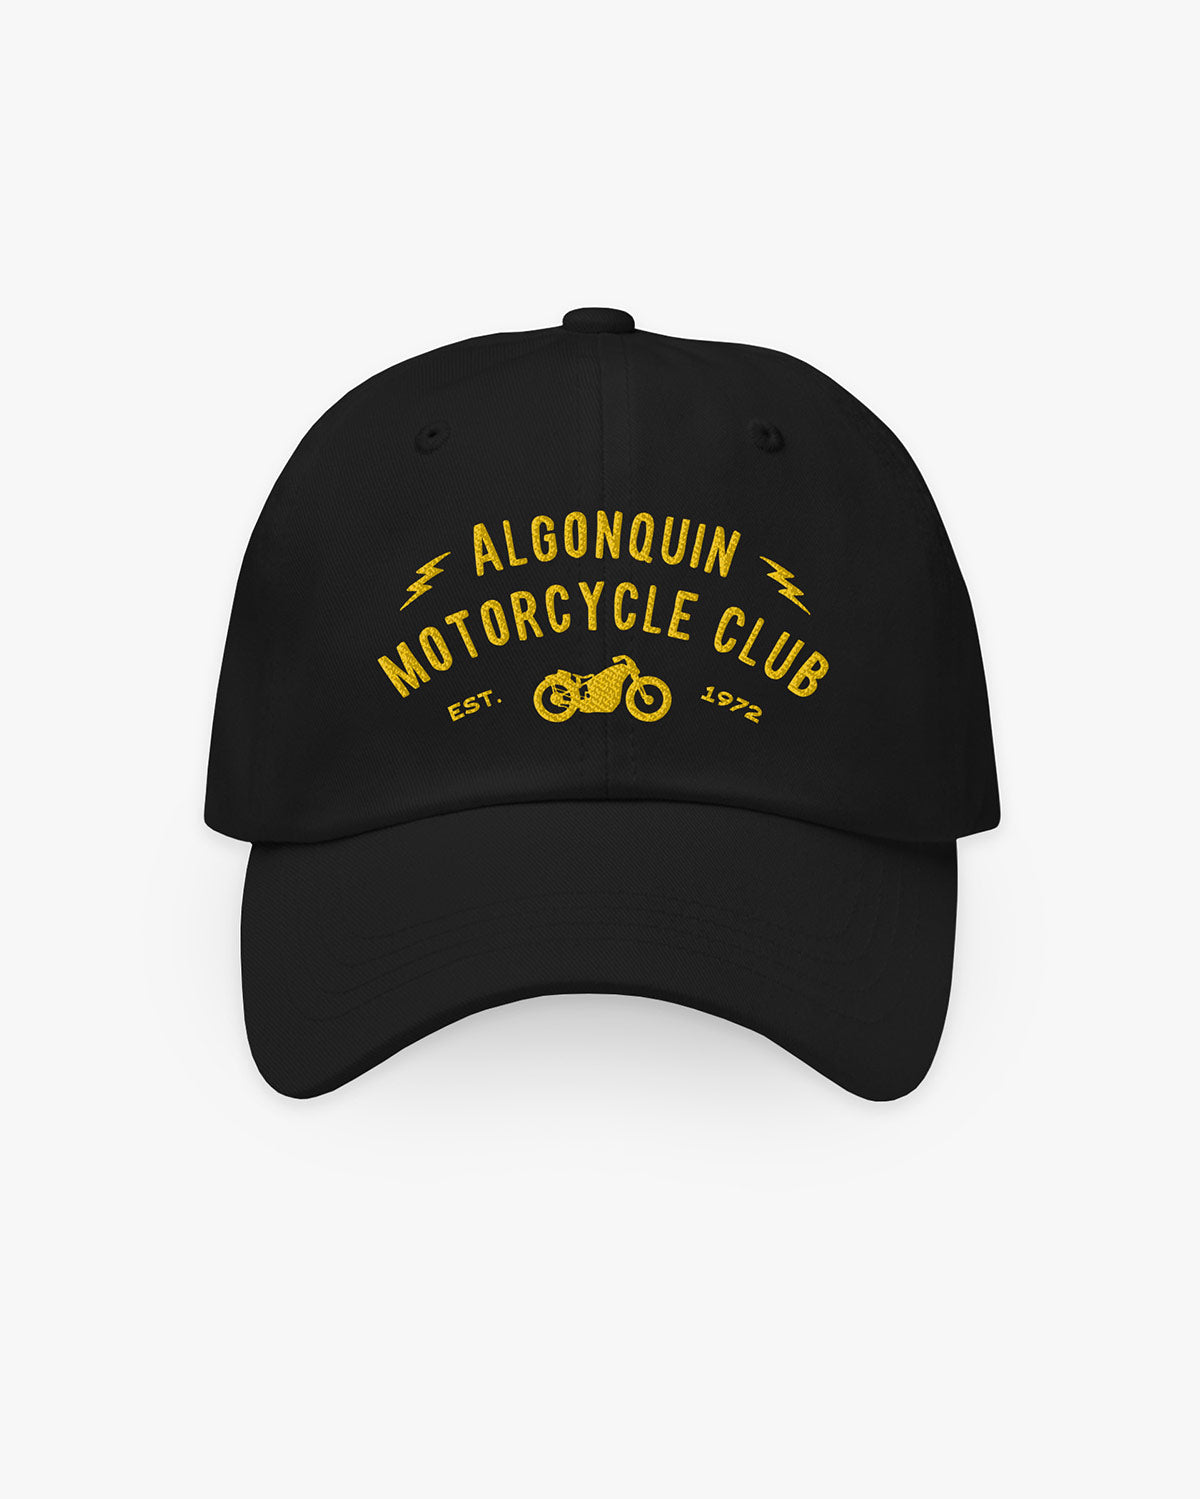 Motorcycle Club - Algonquin - Hat